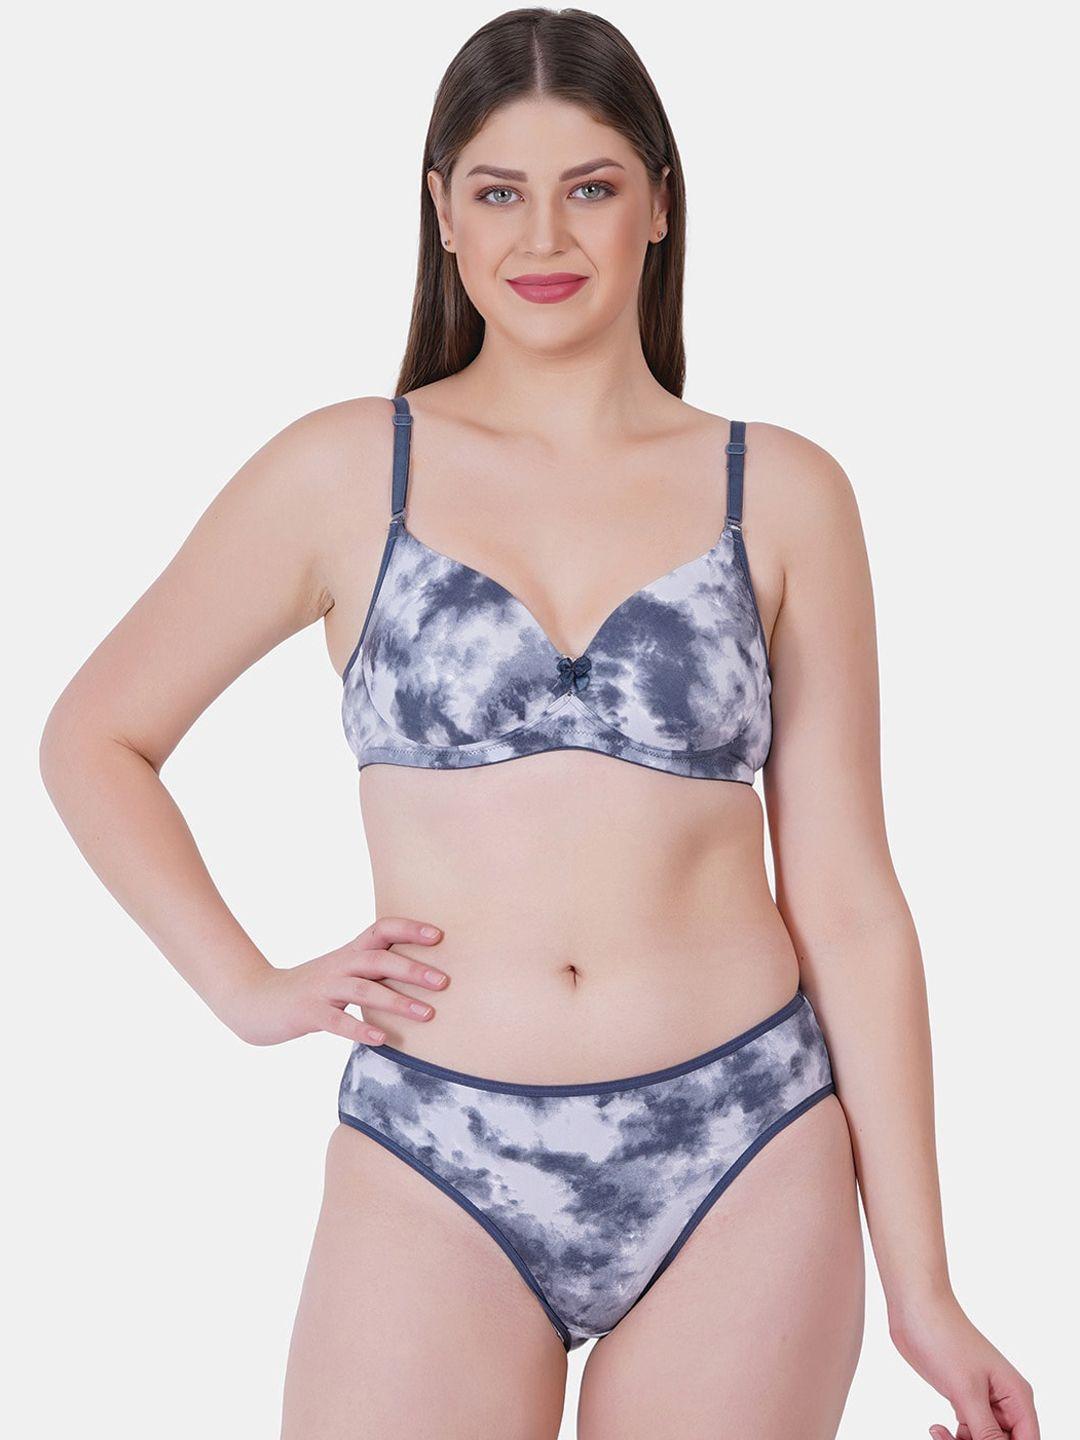 reveira abstract printed lingerie set